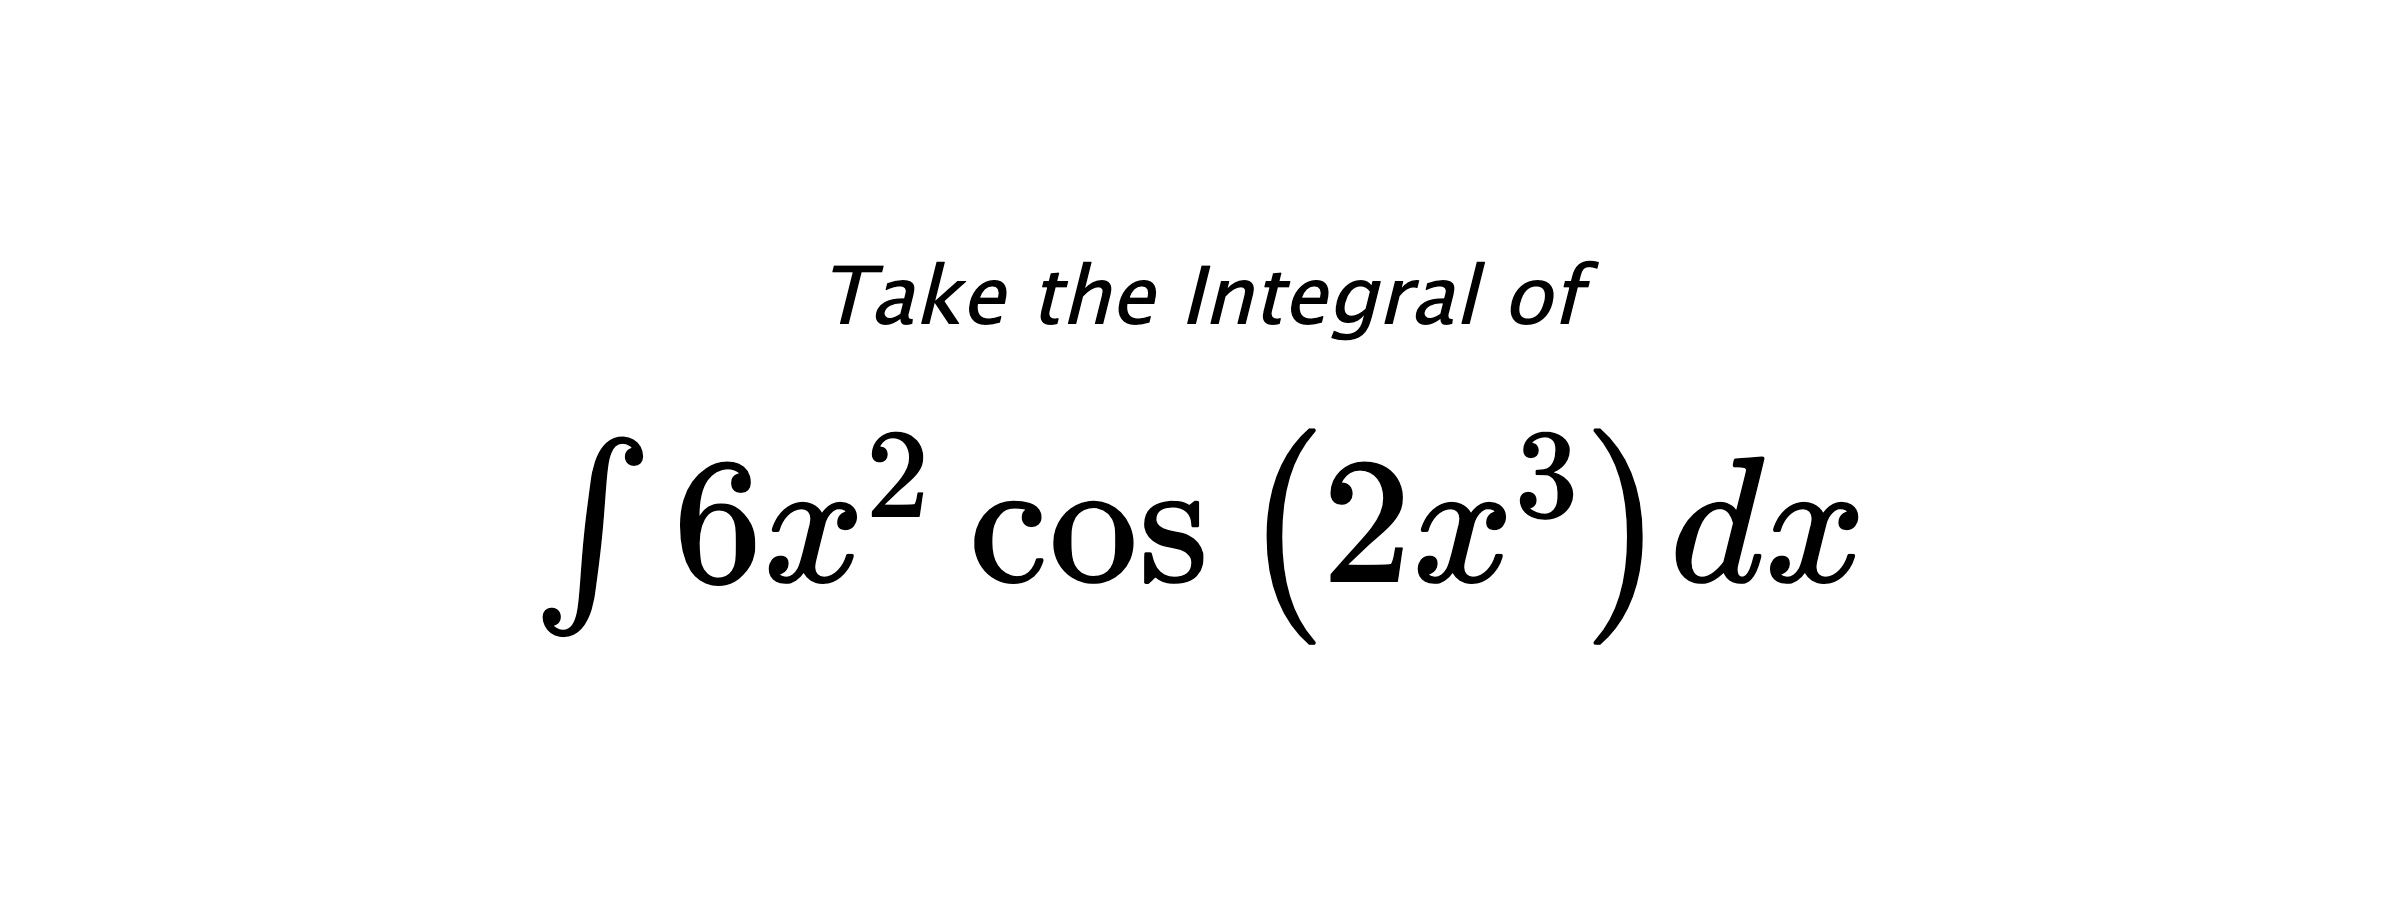 Take the Integral of $ \int 6 x^{2} \cos{\left(2 x^{3} \right)} dx $